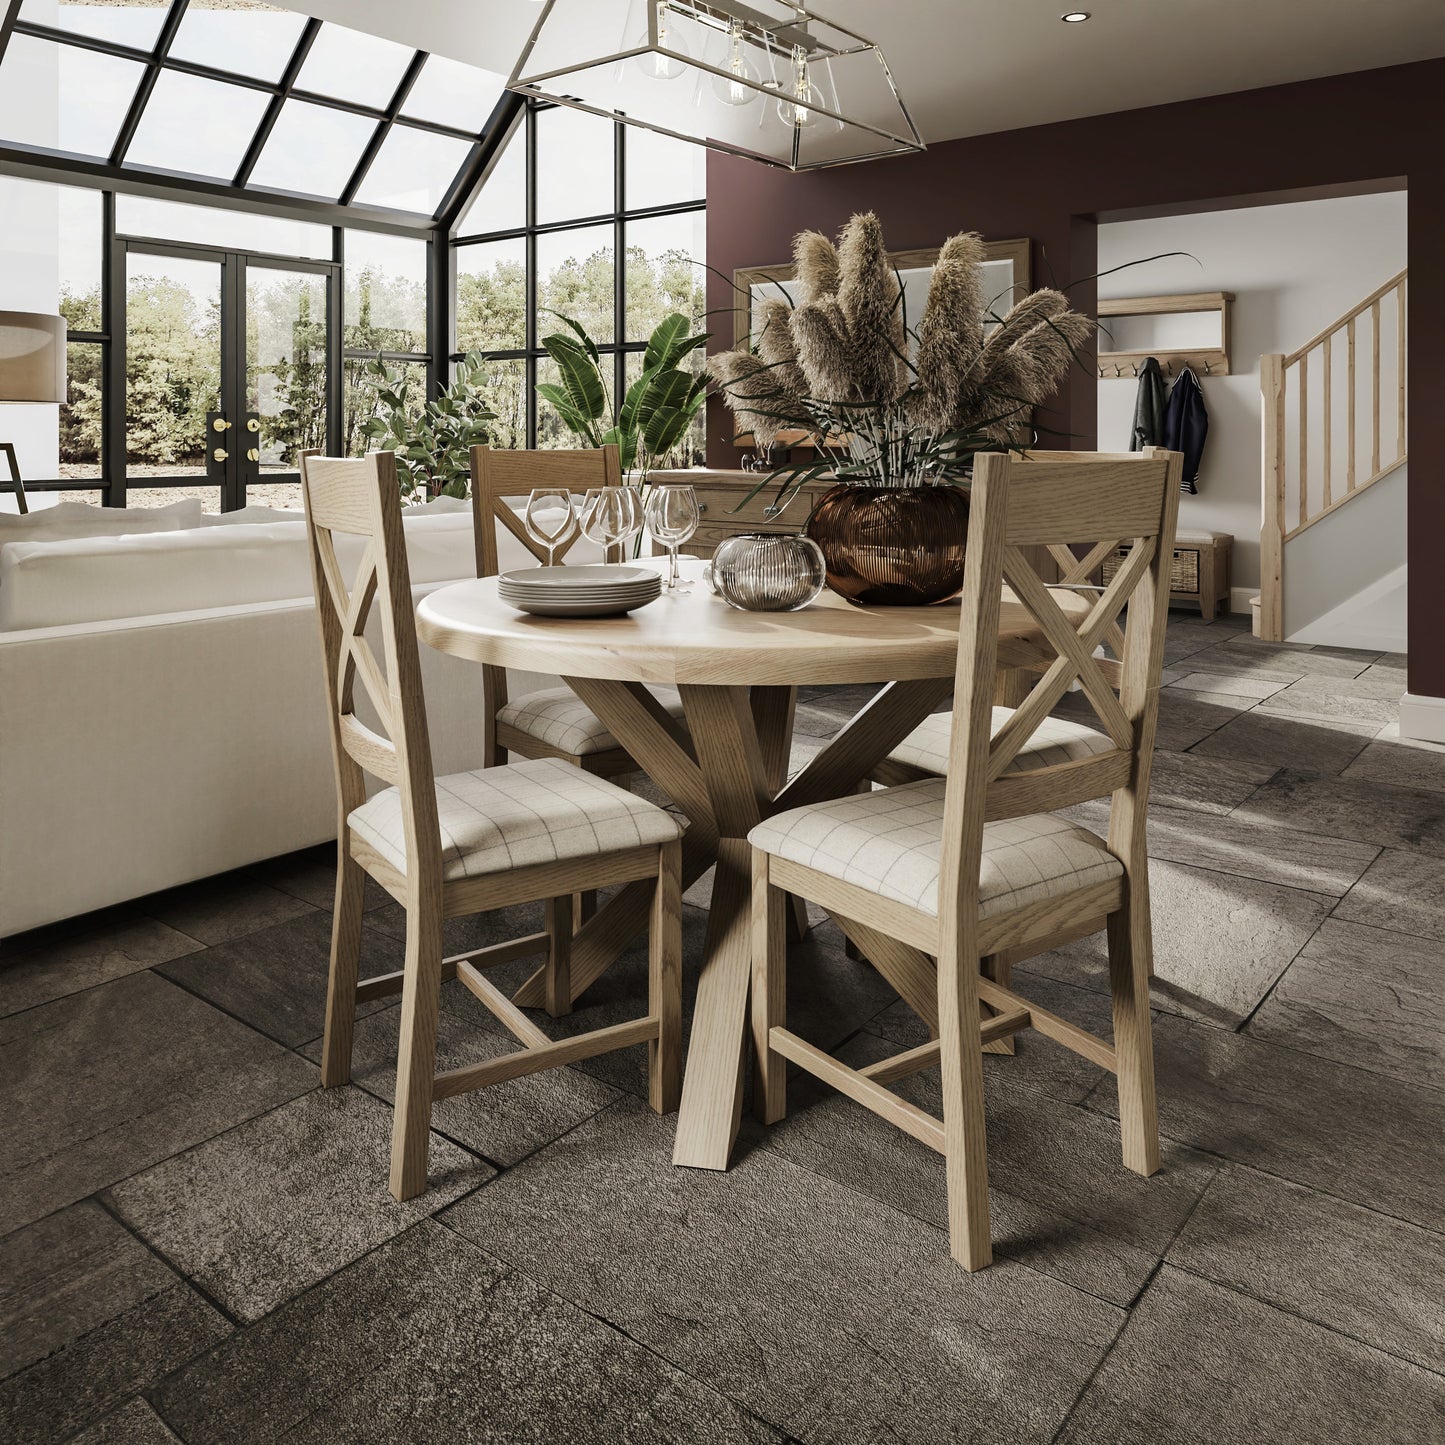 Horner Small Round Dining Table